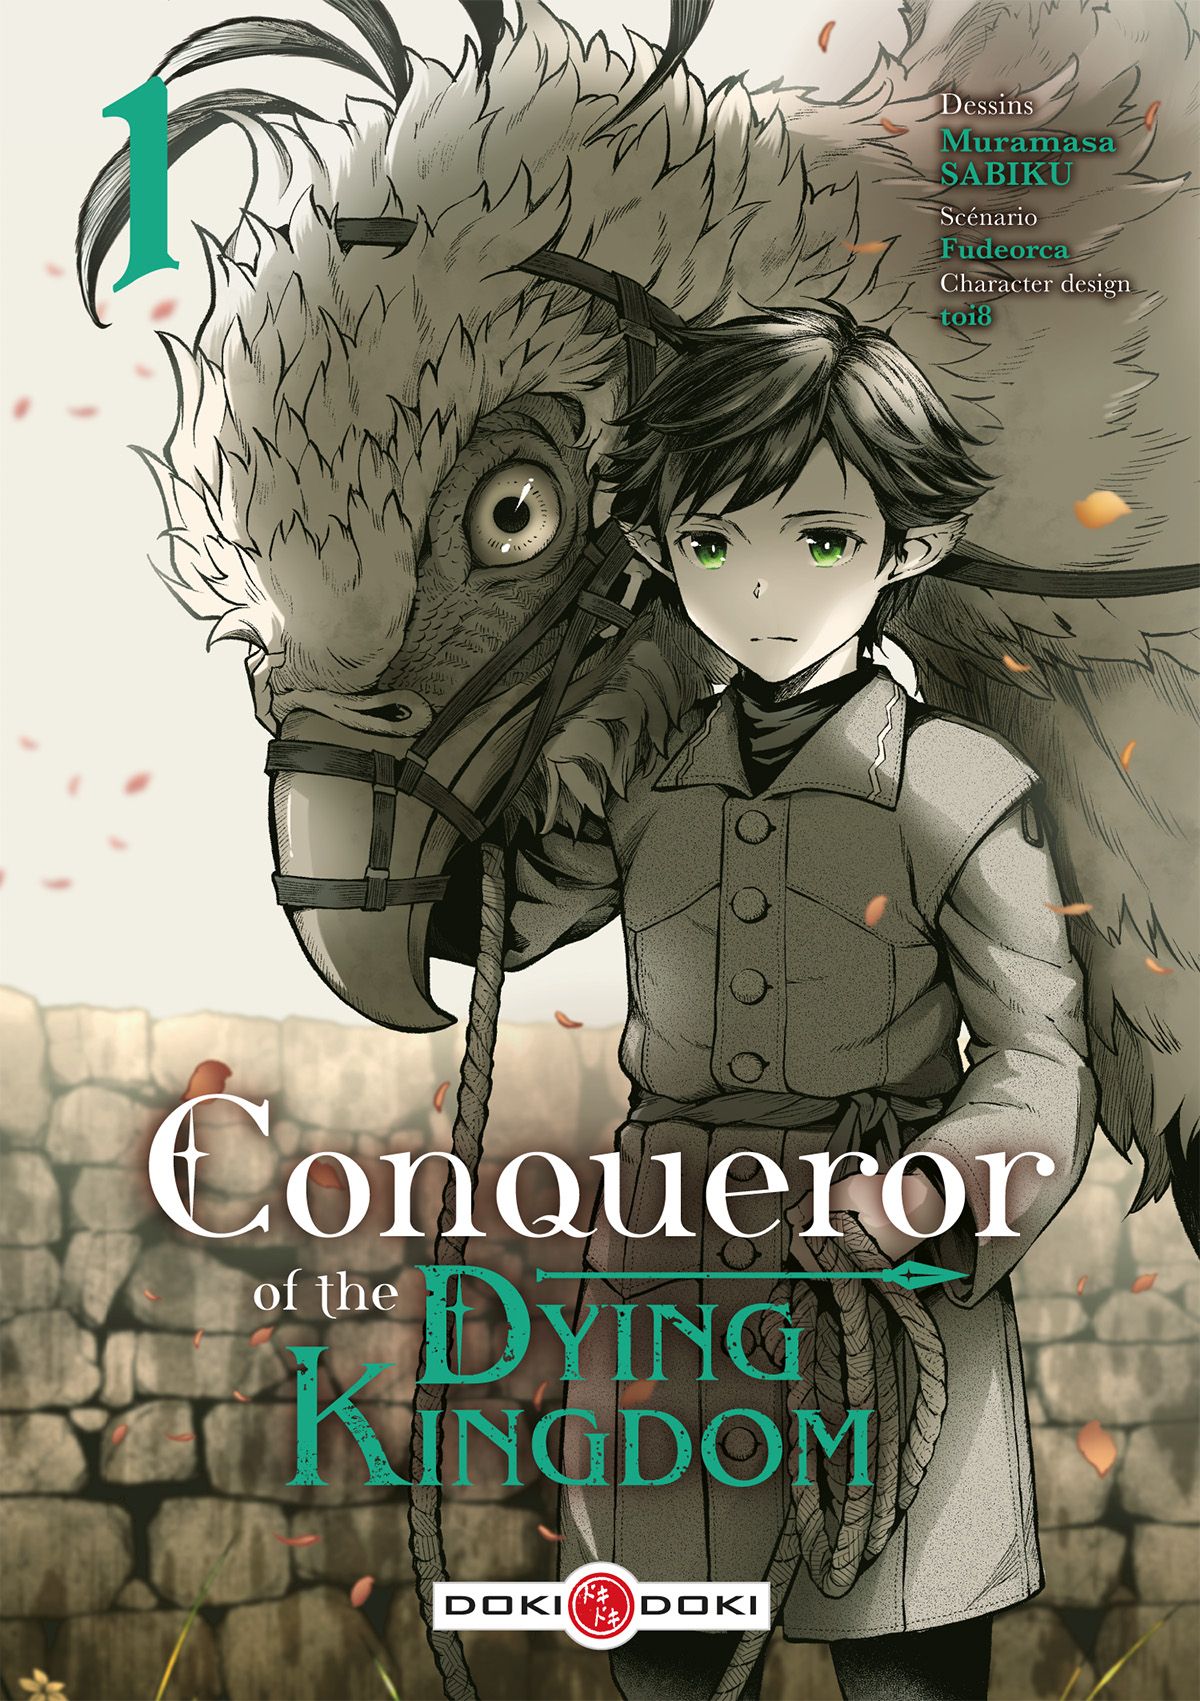 Conqueror of the Dying Kingdom